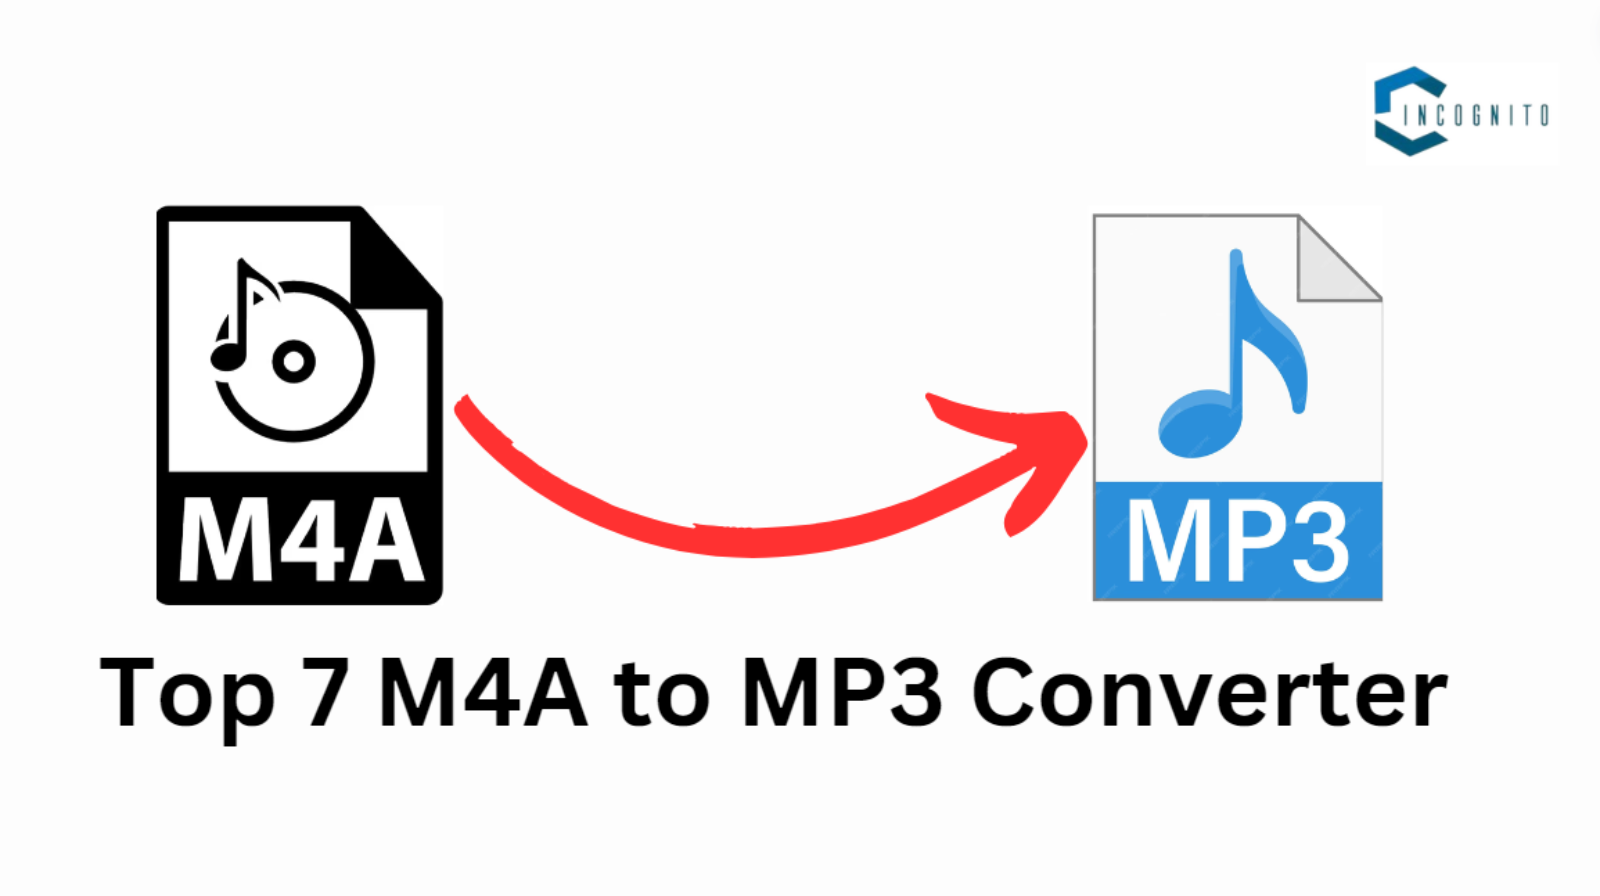 Top 7 M4A to MP3 Converter